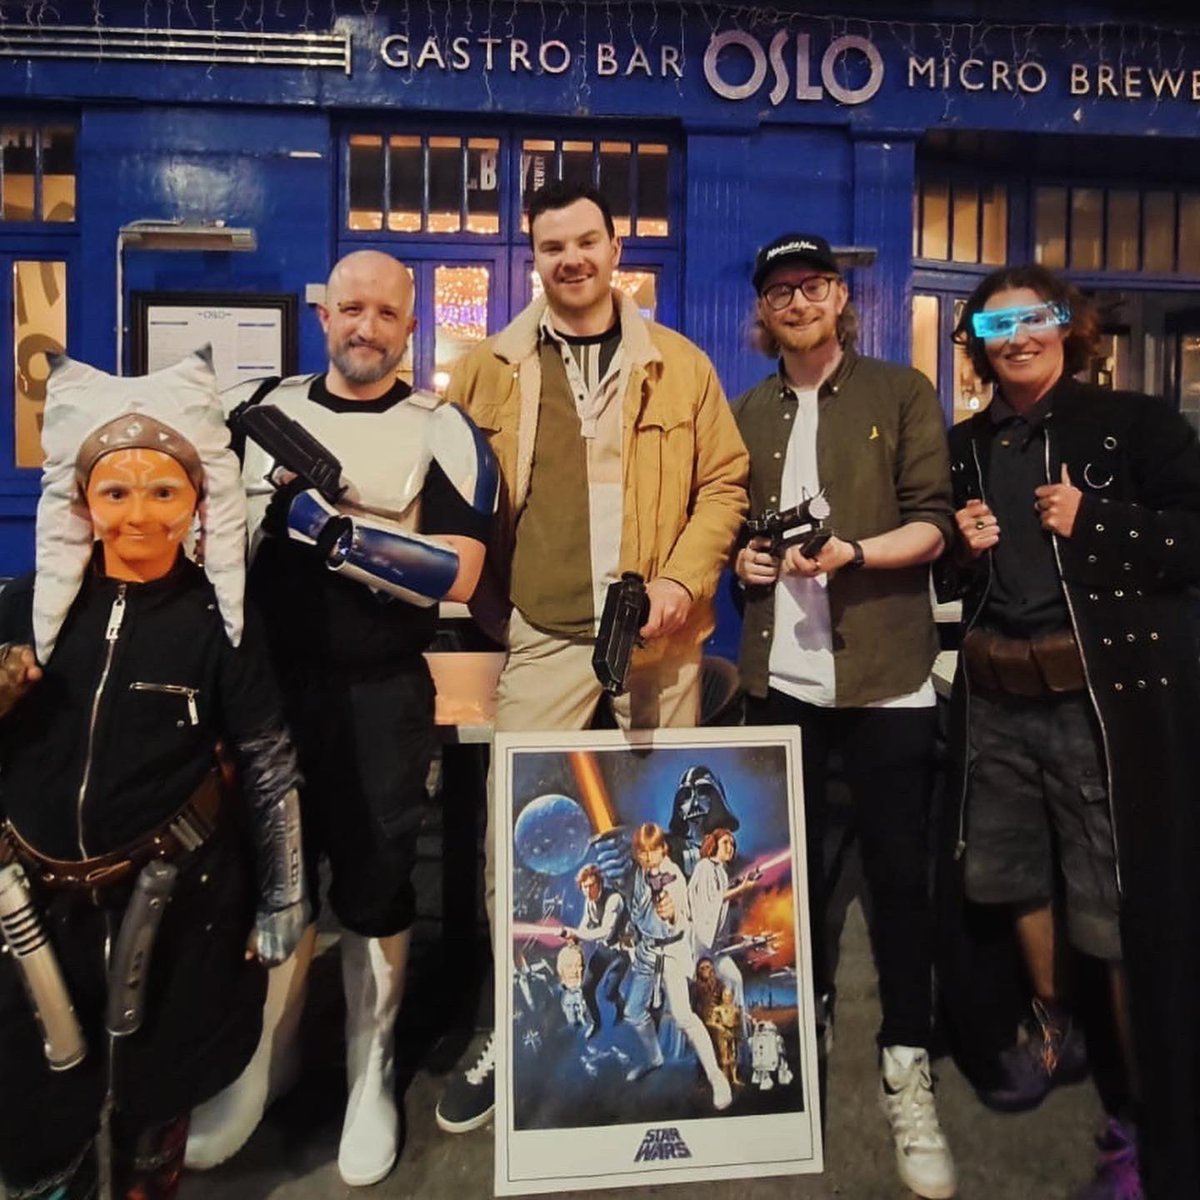 Would you look at the costume effort! ✨ Brian & his daughter (AKA Captain Rex & Ahsoka Tano) were the Best Dressed winners at our sold out #MayThe4th Star Wars Quiz at the Oslo earlier this month 🔫 Visit our website for our announced events: wompevents.com/events